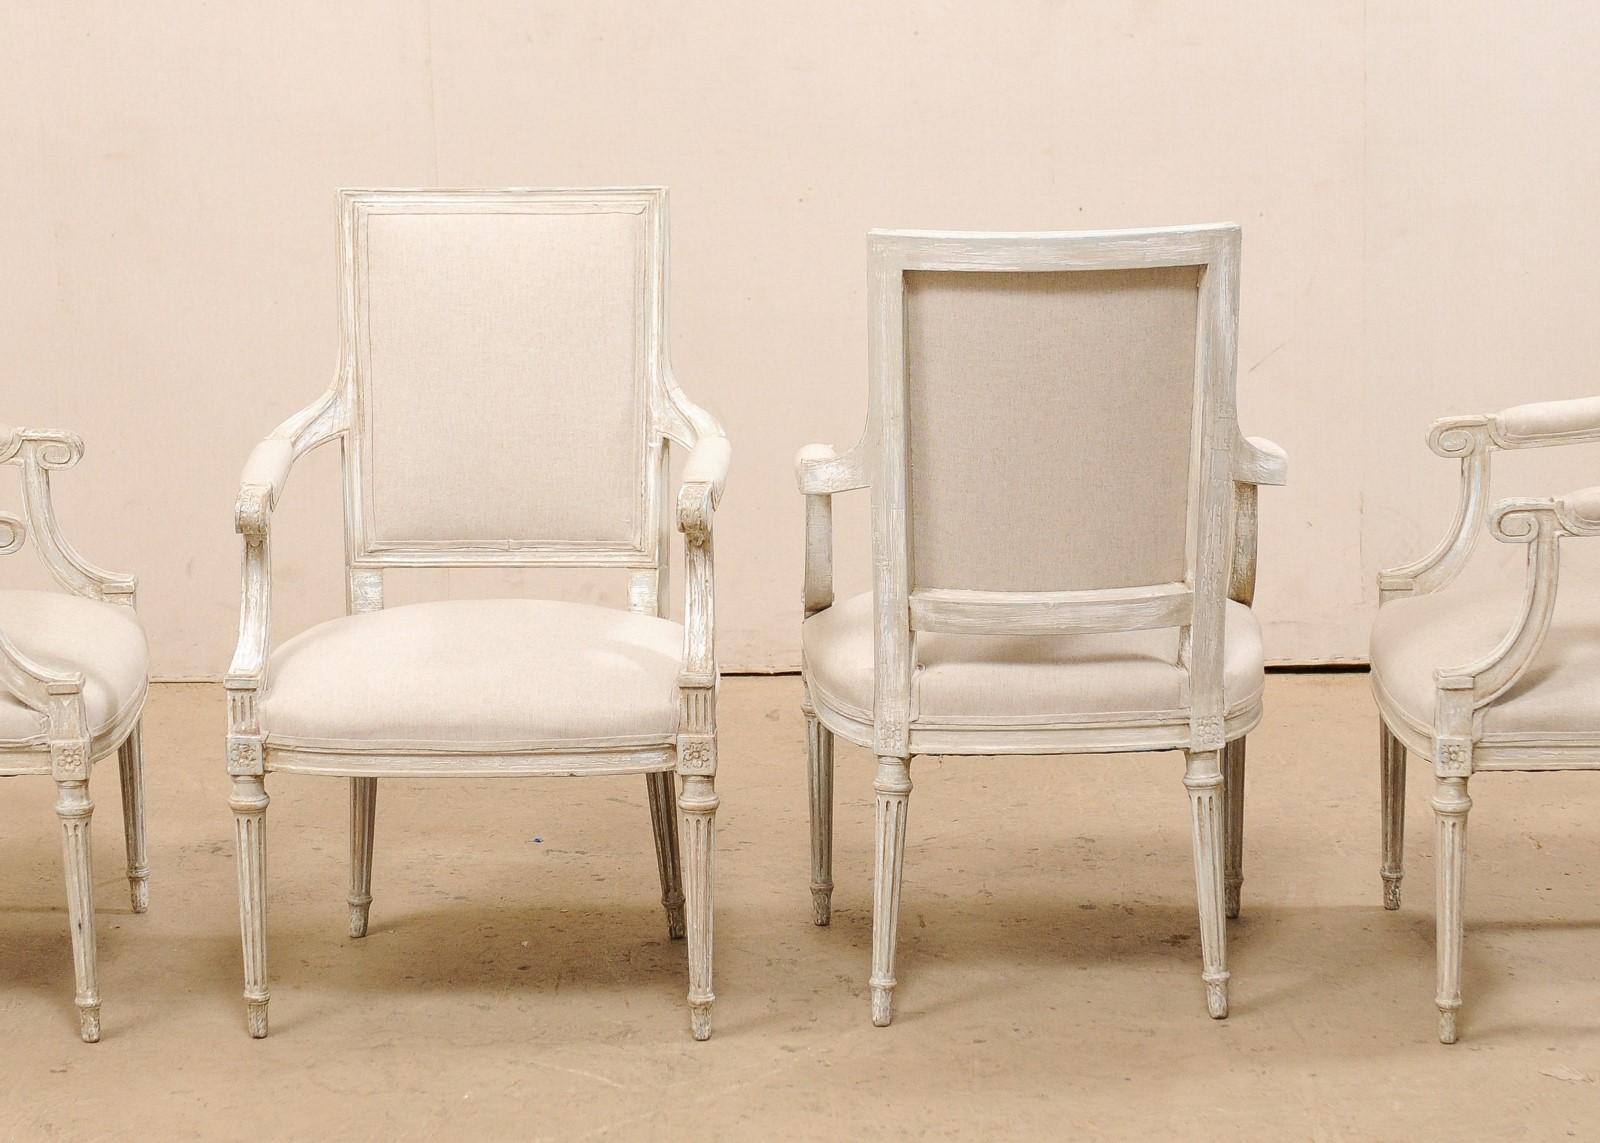 20th Century French Set of Four Carved Wood Armchairs with Newly Upholstered Seats and Backs